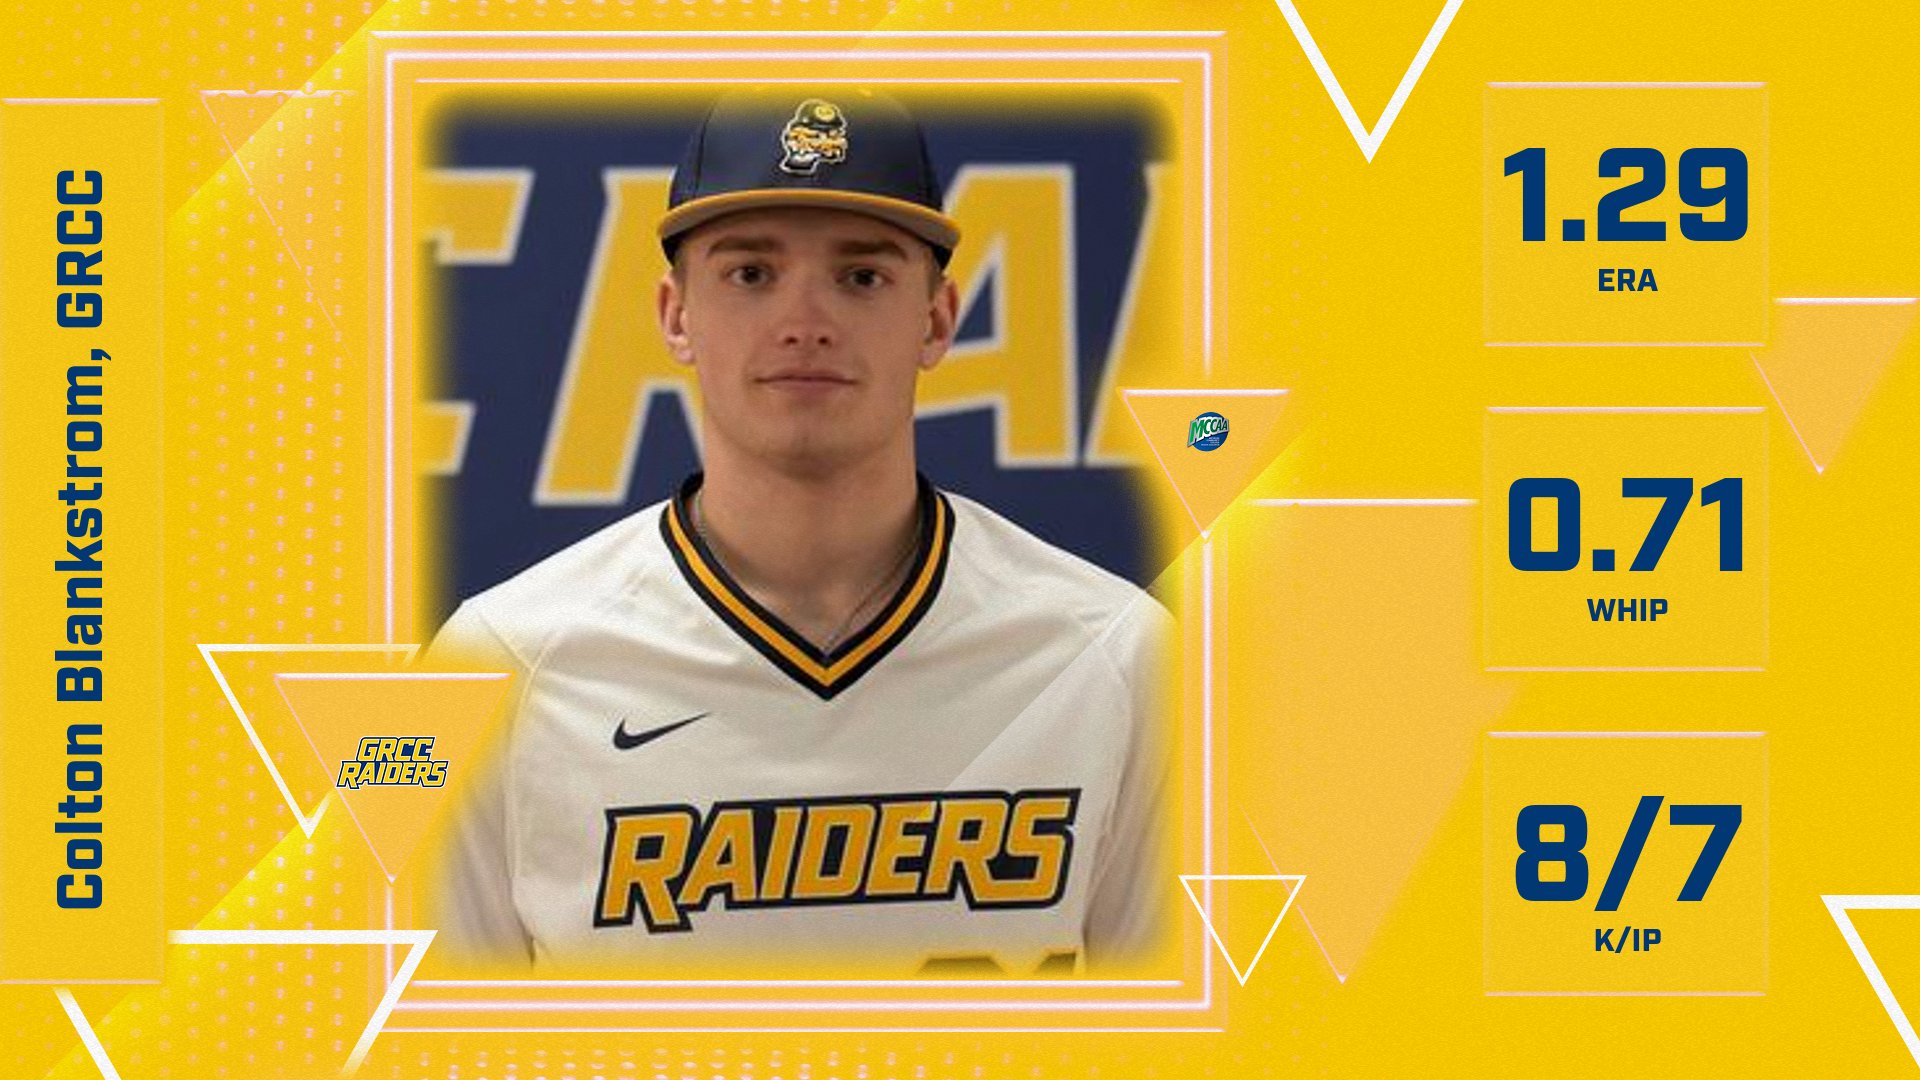 GRCC's Blankstrom Earns MCCAA Northern Conference Baseball Pitcher of the Week4